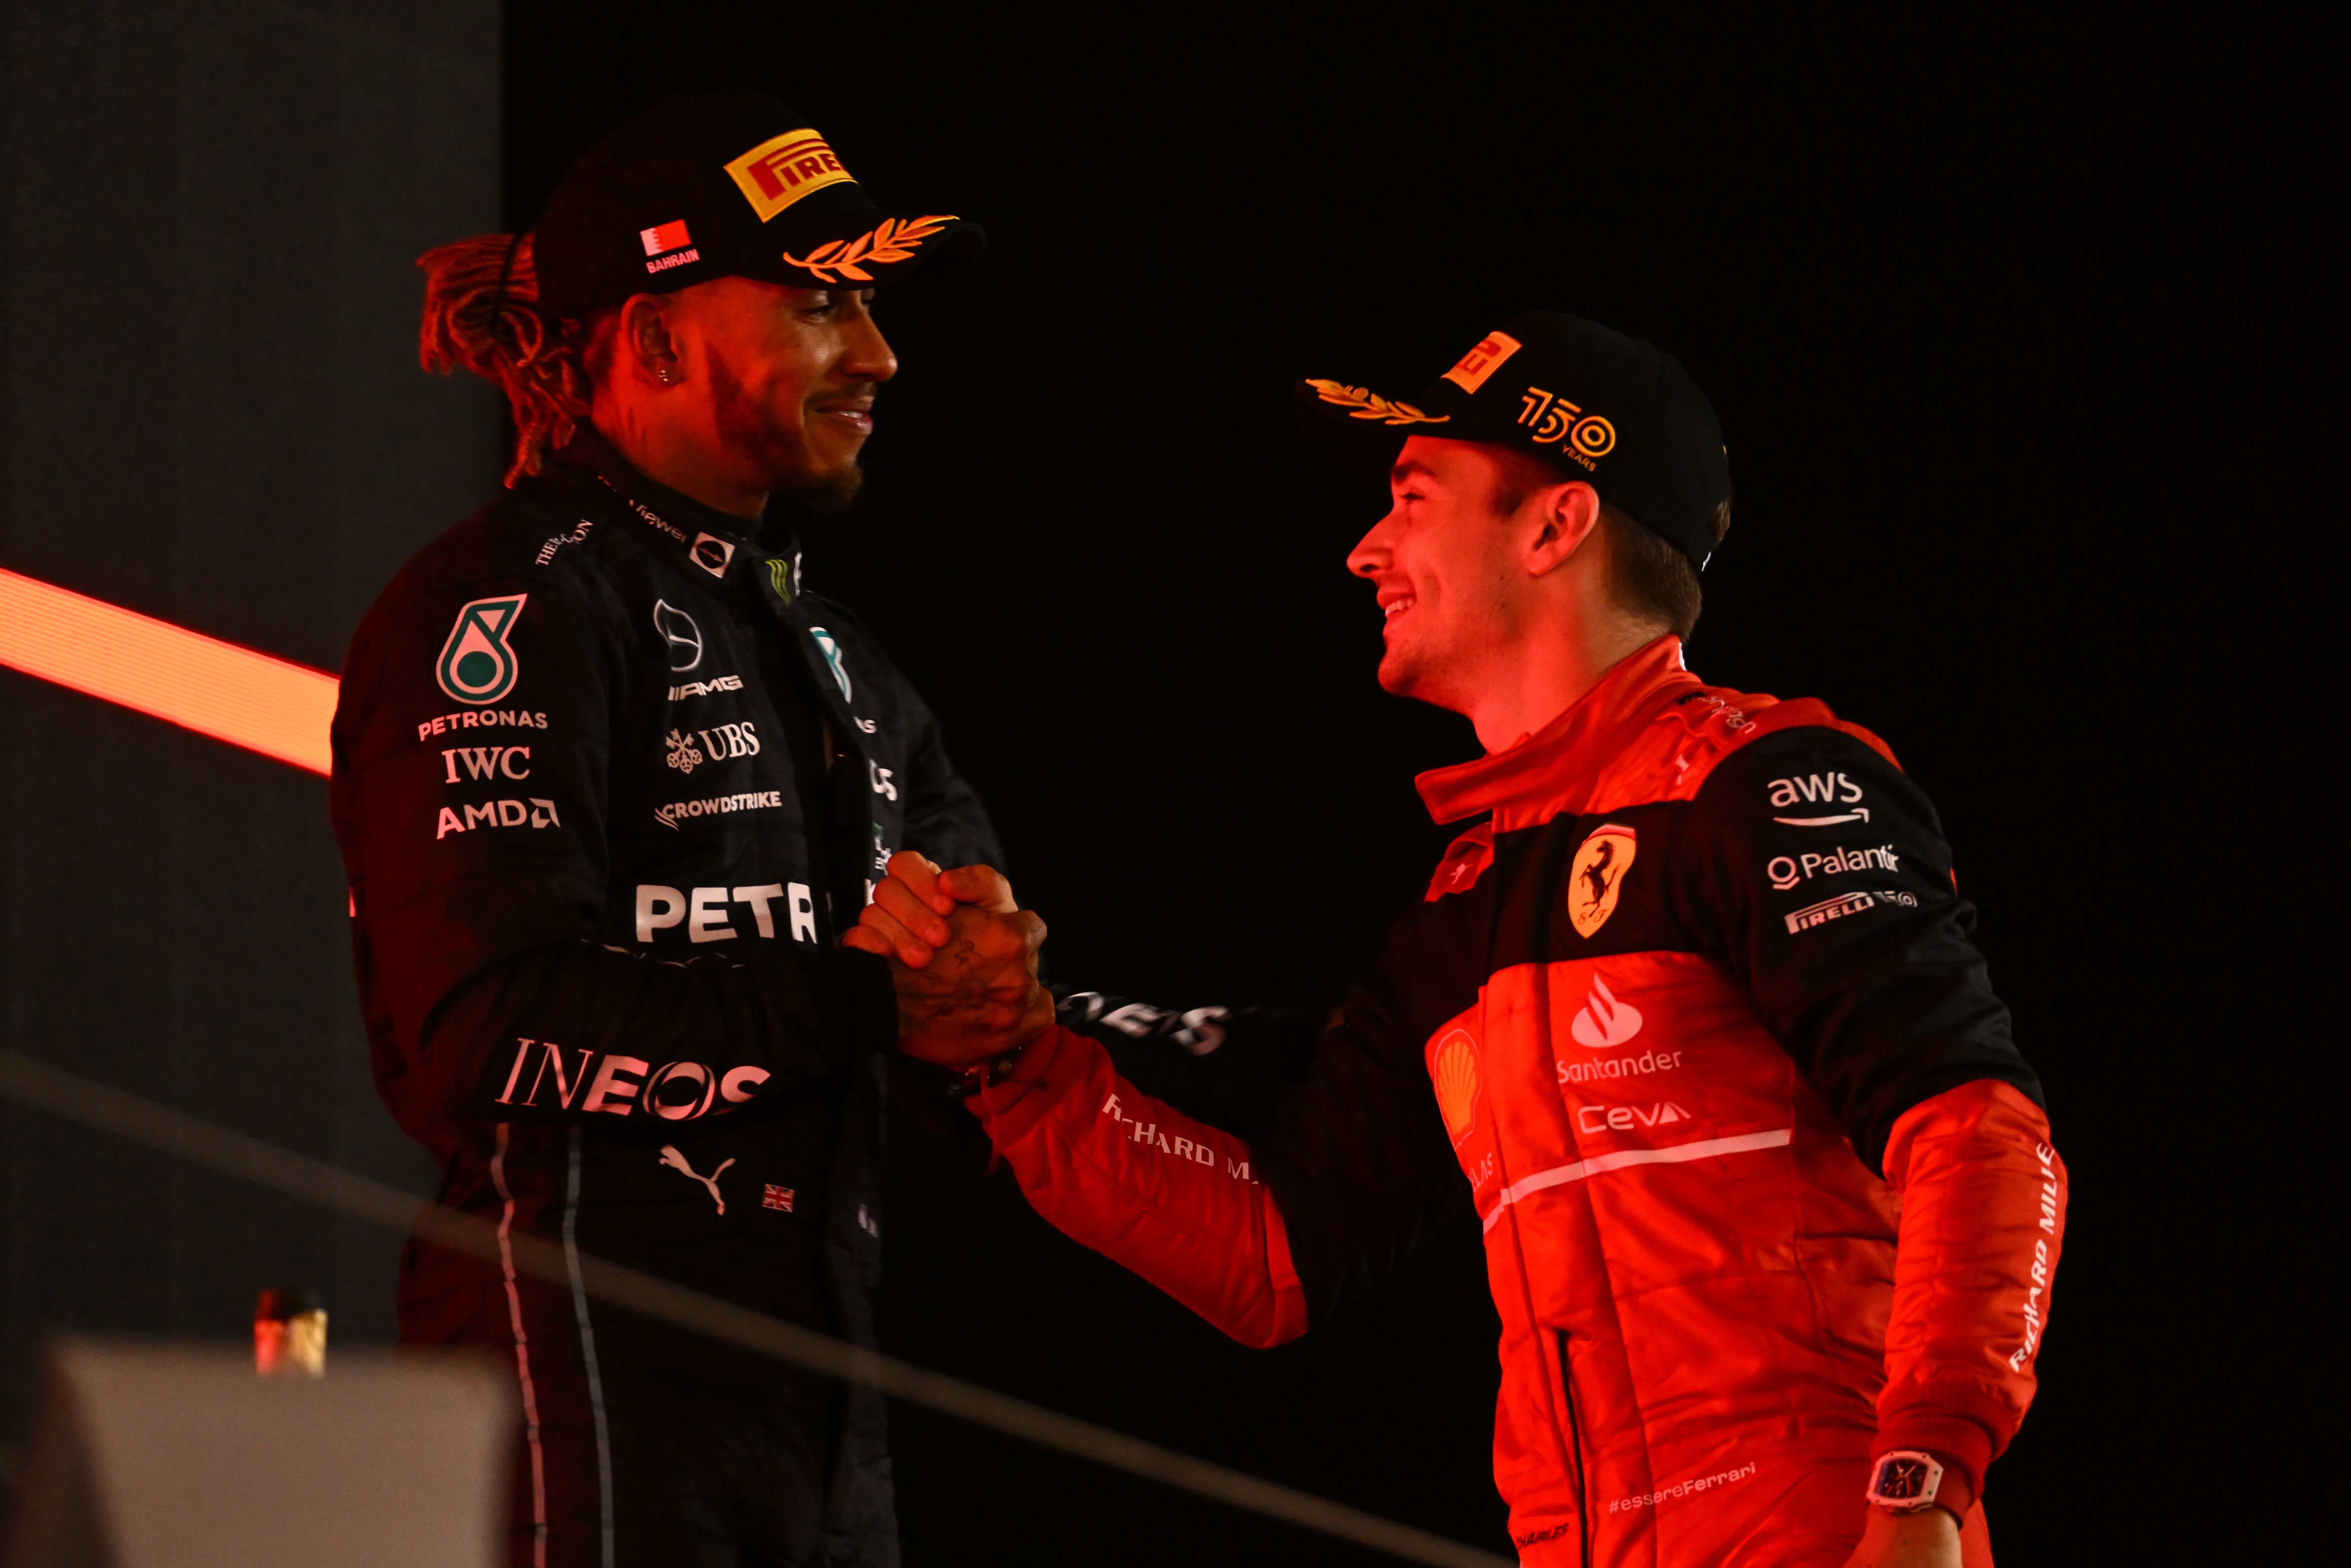 It was reported that Hamilton could be involved in a swap deal with Ferrari’s Charles Leclerc